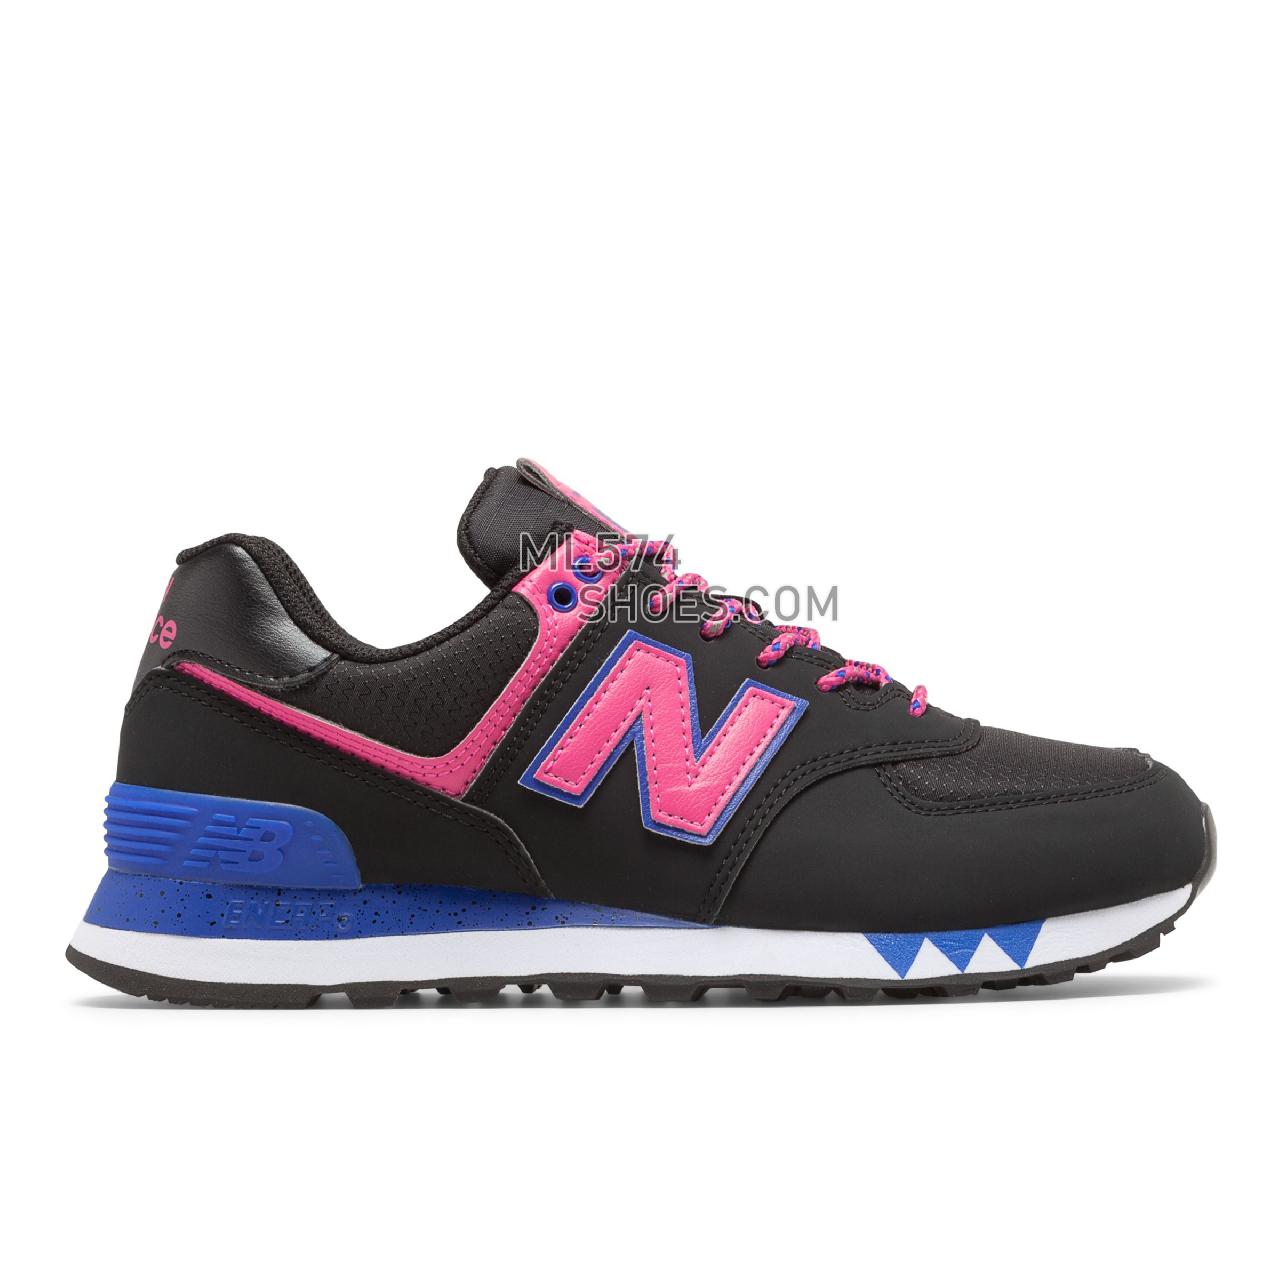 New Balance 574 - Women's Classic Sneakers - Black with Pink - WL574JOA